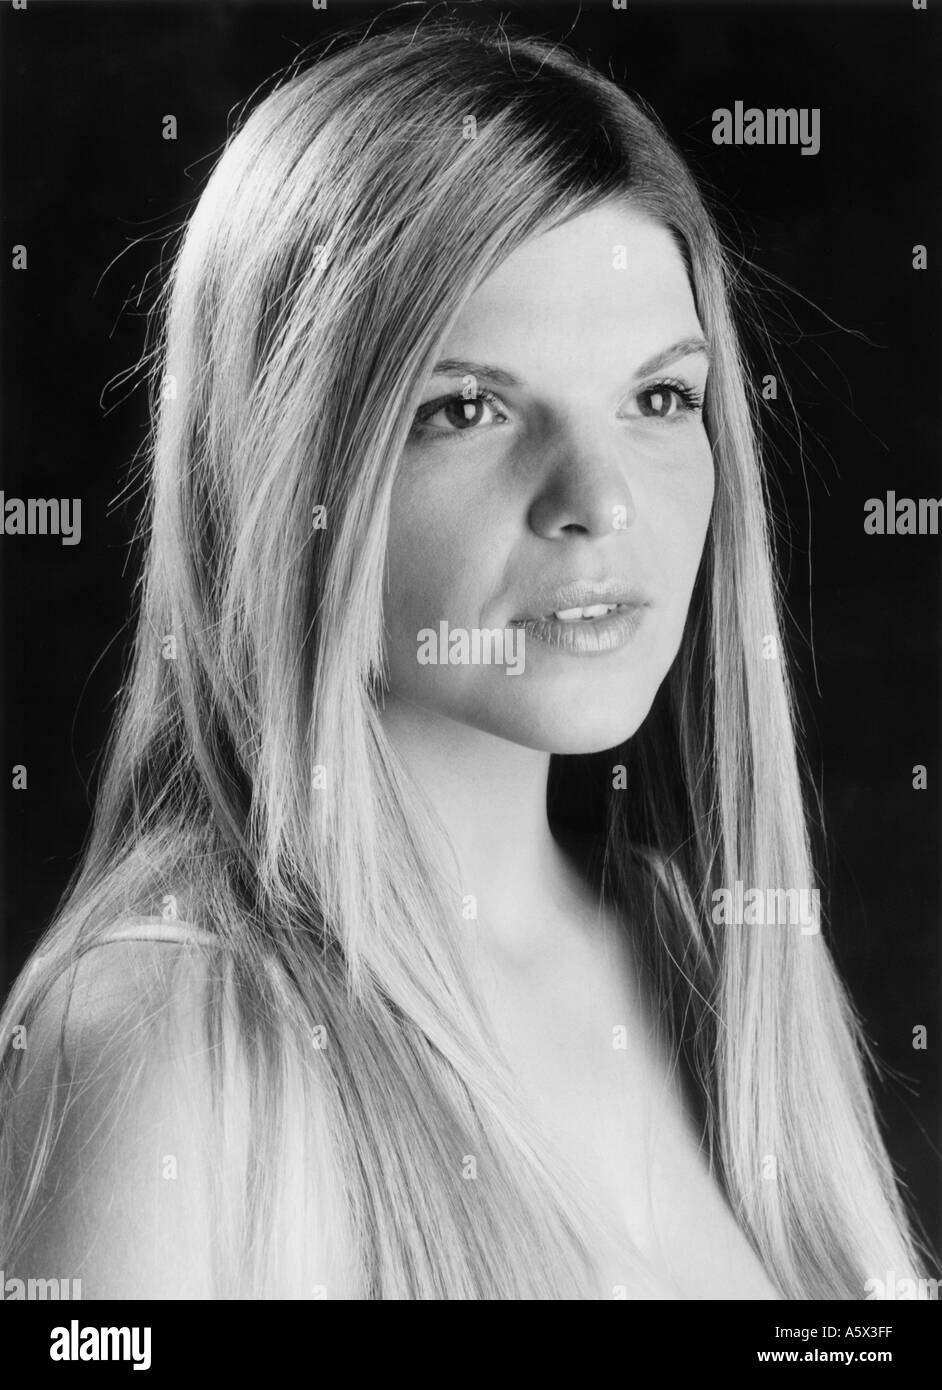 Black and White Portrait of a Blonde Caucasian Girl Stock Photo